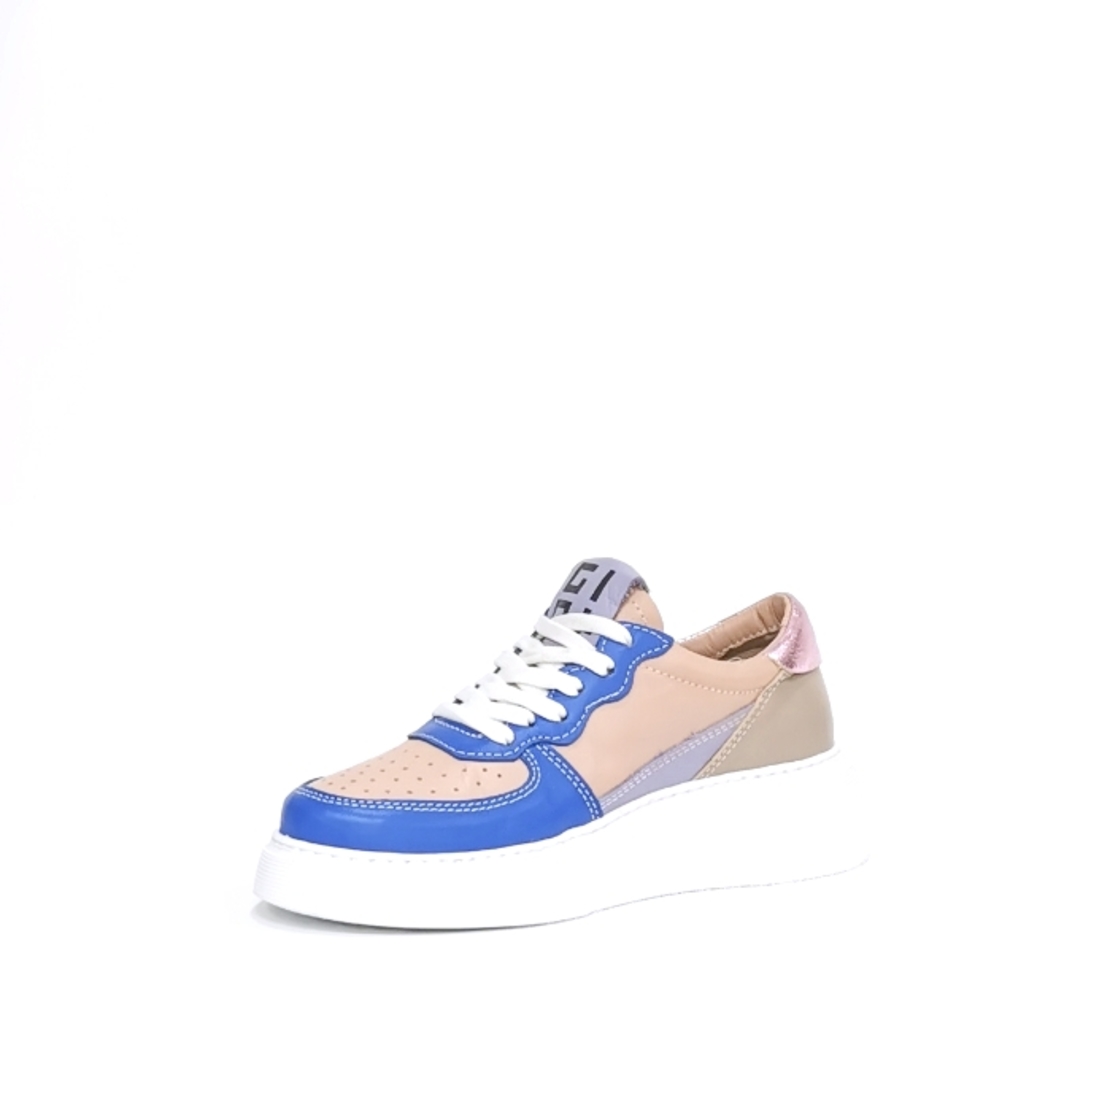 Women's sneaker made of natural leather in the color blue + powder with anatomical insole/73326